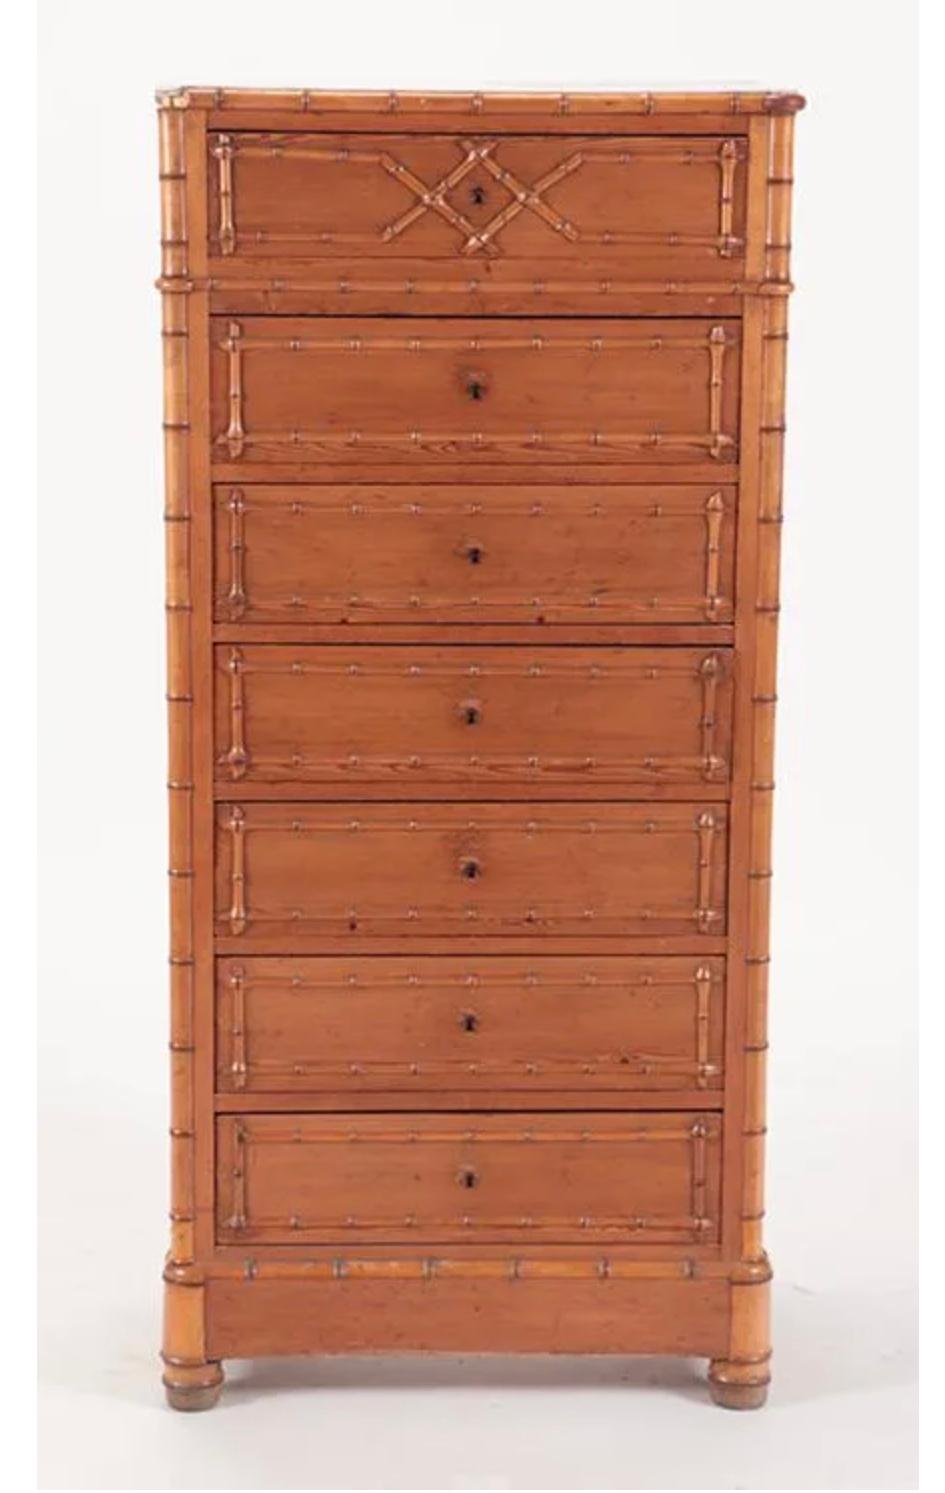 A rare French faux bamboo and burl wood Lingerie Chest from the second quarter of the 19th century, with conforming marble tops and geometric design. This tall and narrow chest features a white veined marble top sitting above seven drawers. Designed